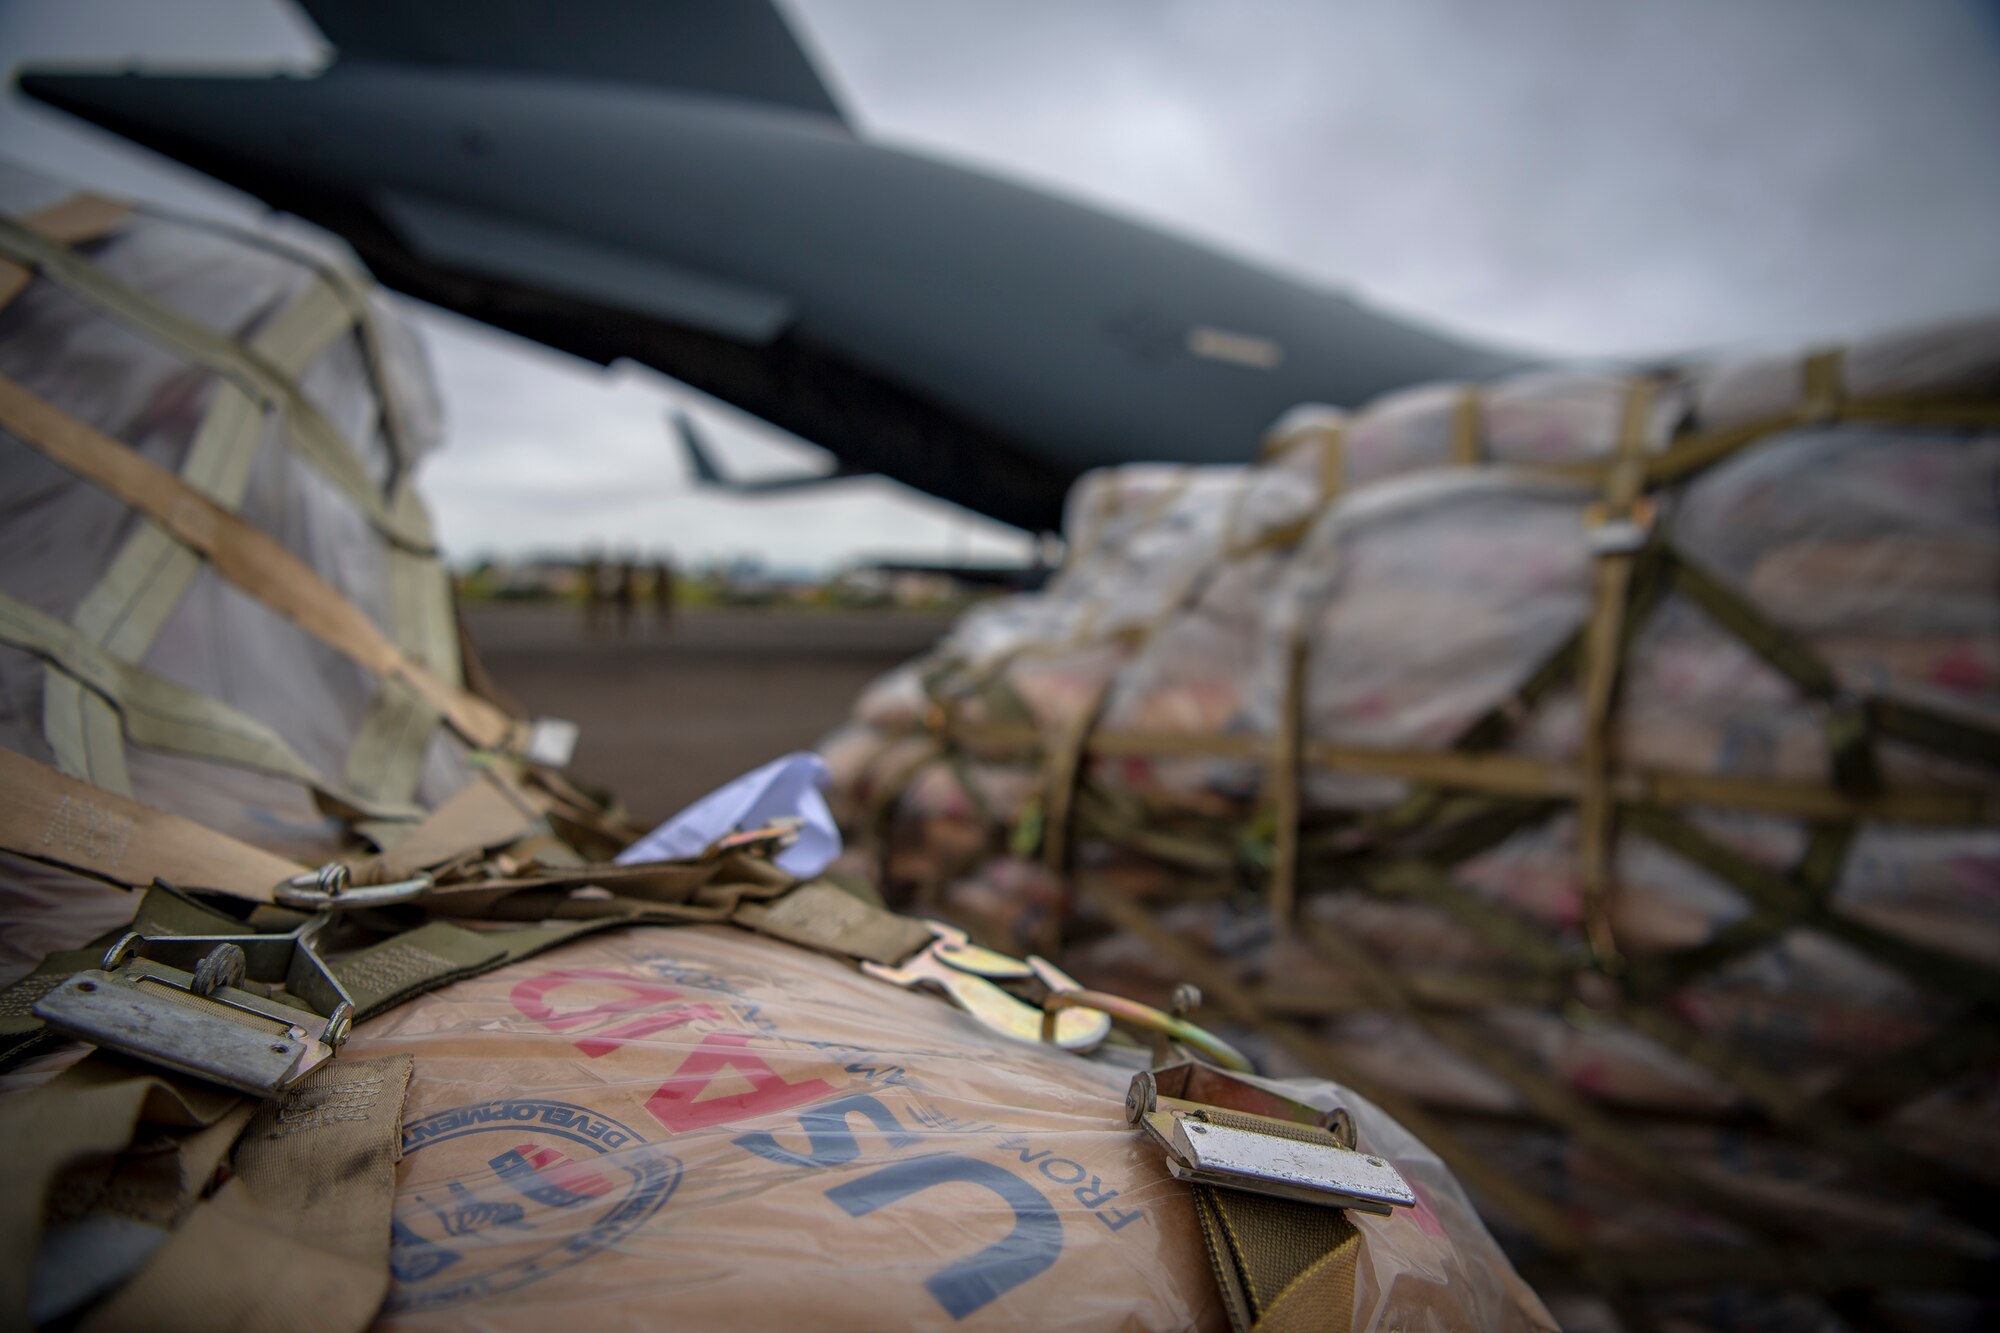 A U.S. Air Force C-17 Globemaster III assigned to Joint Base Lewis-McChord, Washington, supporting Combined Joint Task Force-Horn of Africa, delivers food aid from the United States Agency for International Development (USAID) in Maputo, Mozambique, April 2, 2019. The task force is helping meet requirements identified by USAID assessment teams and humanitarian organizations working in the region by providing logistics support and manpower to USAID at the request of the Government of the Republic of Mozambique. (U.S. Air Force Photo by Tech. Sgt. Chris Hibben)